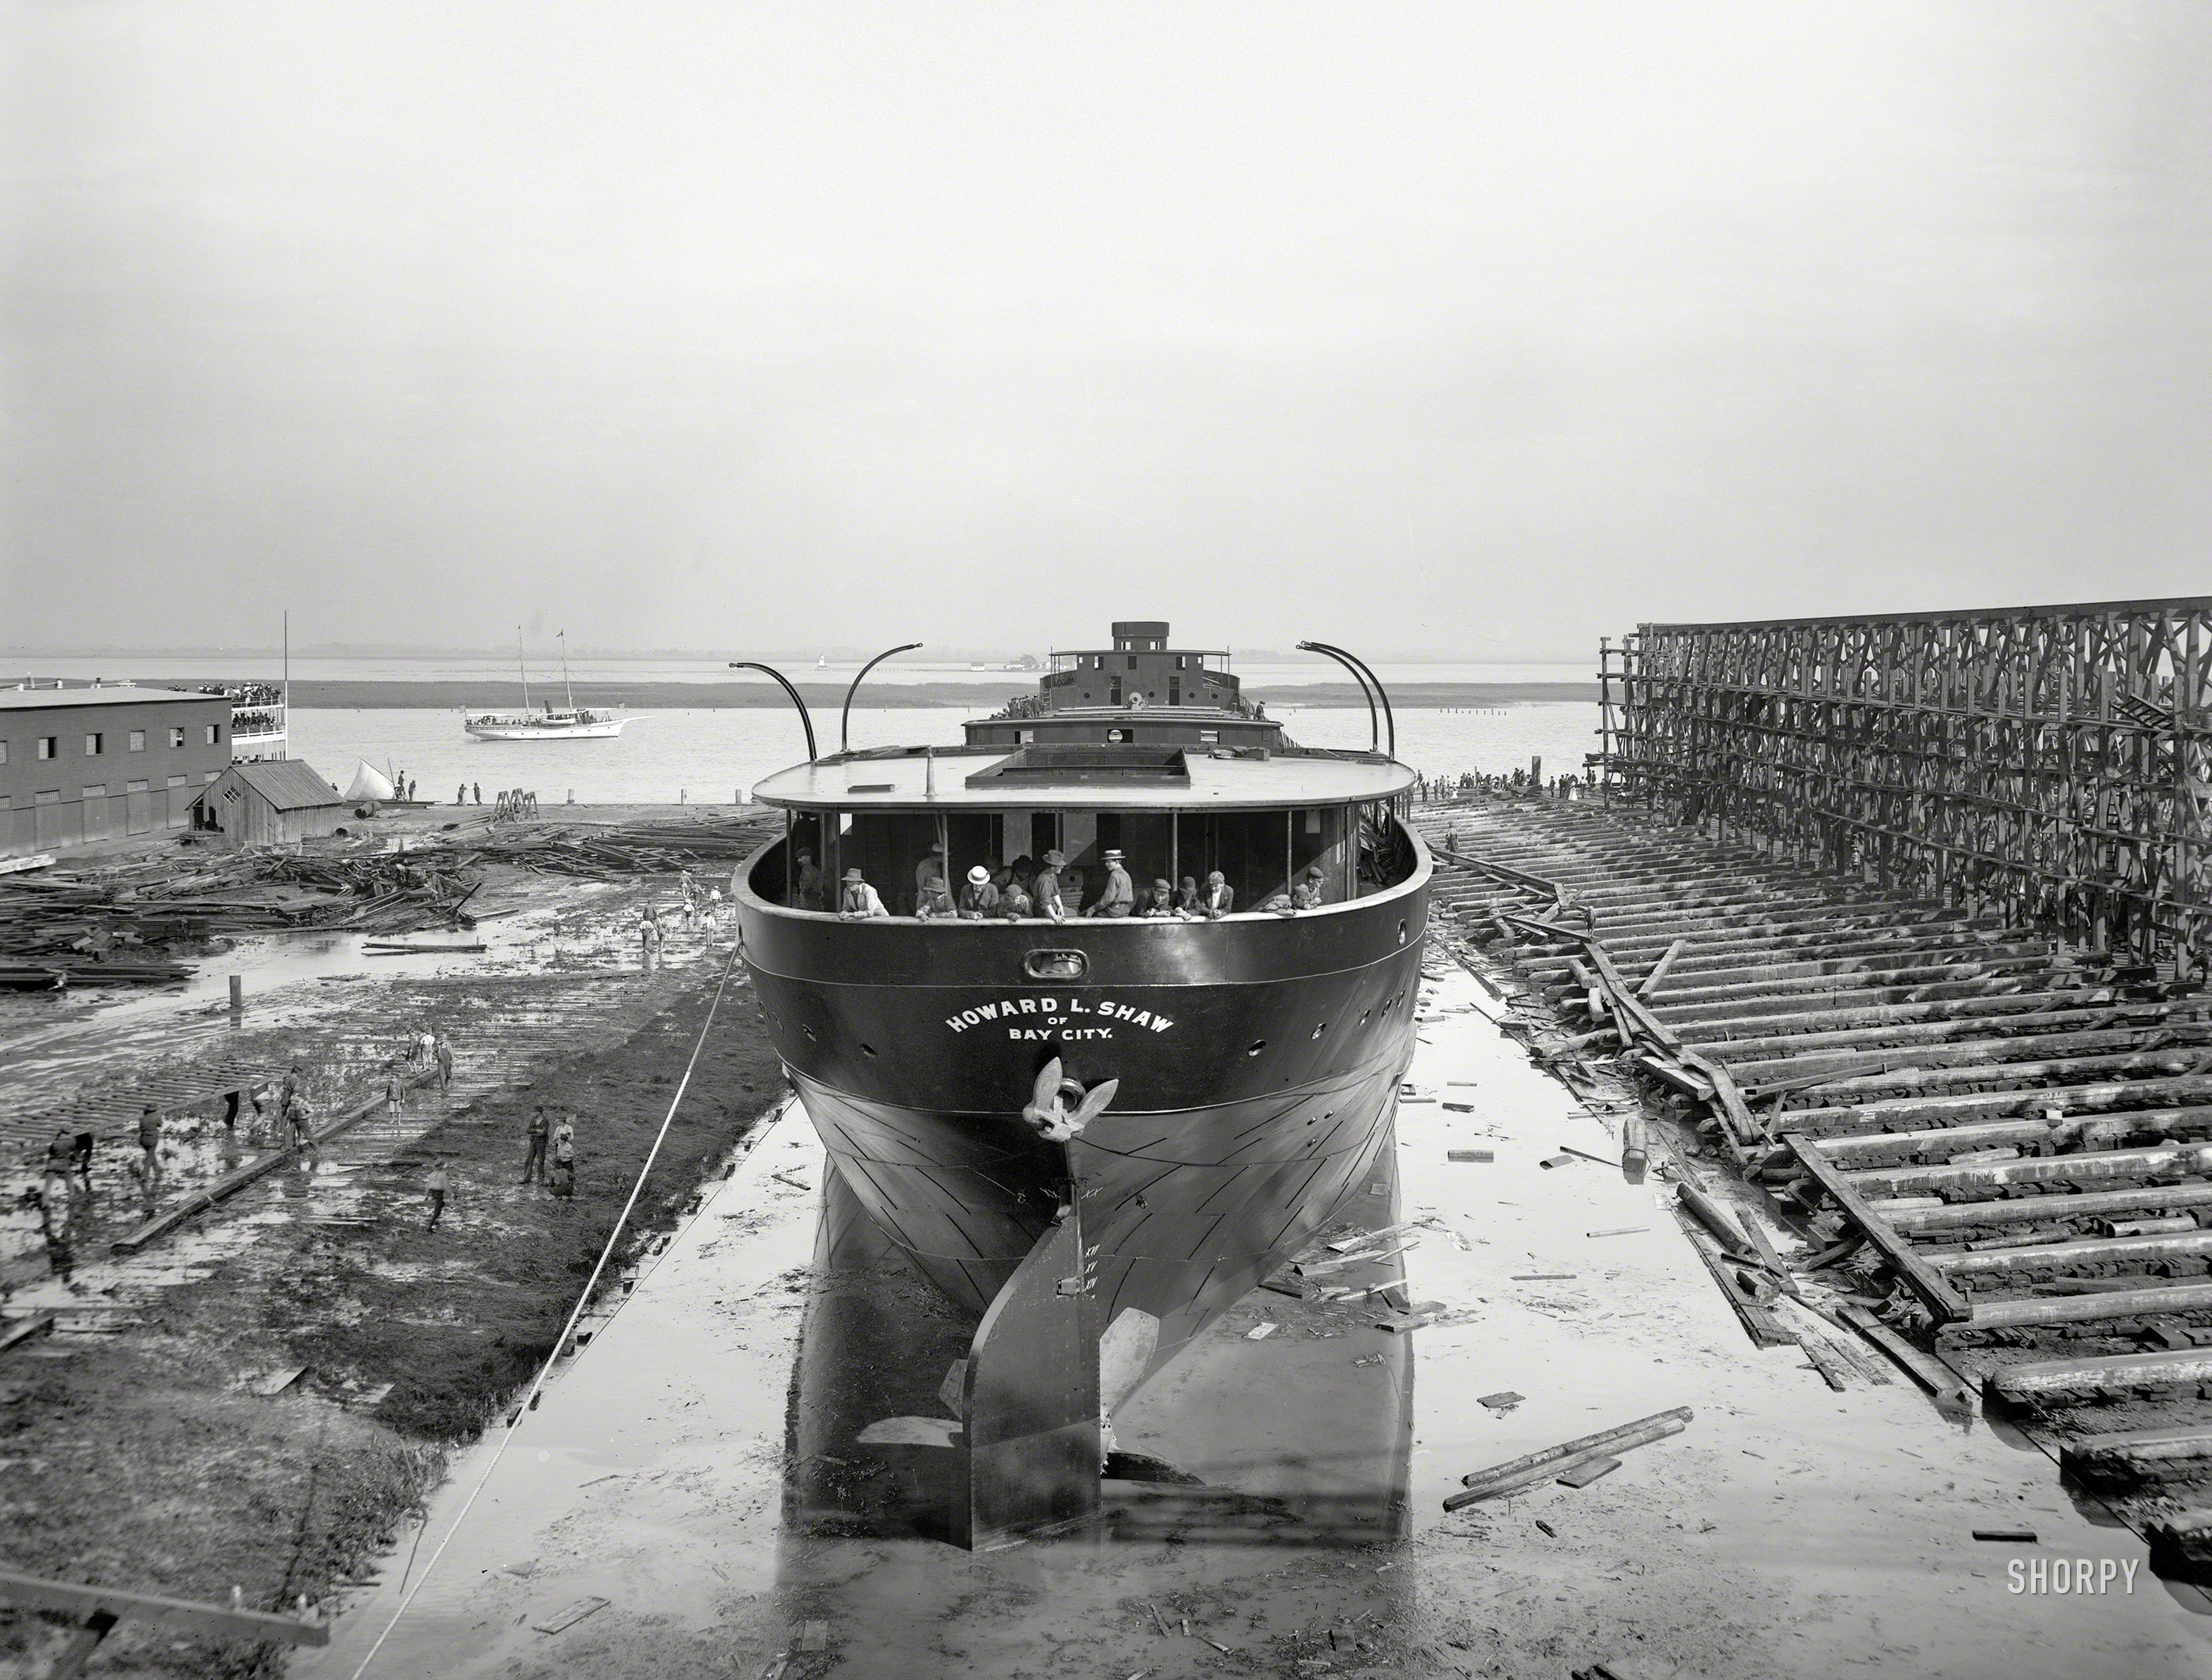 Sept. 15, 1900. Wyandotte, Michigan. "Freighter Howard L. Shaw in the slip." 8x10 inch dry plate glass negative, Detroit Publishing Company. View full size.